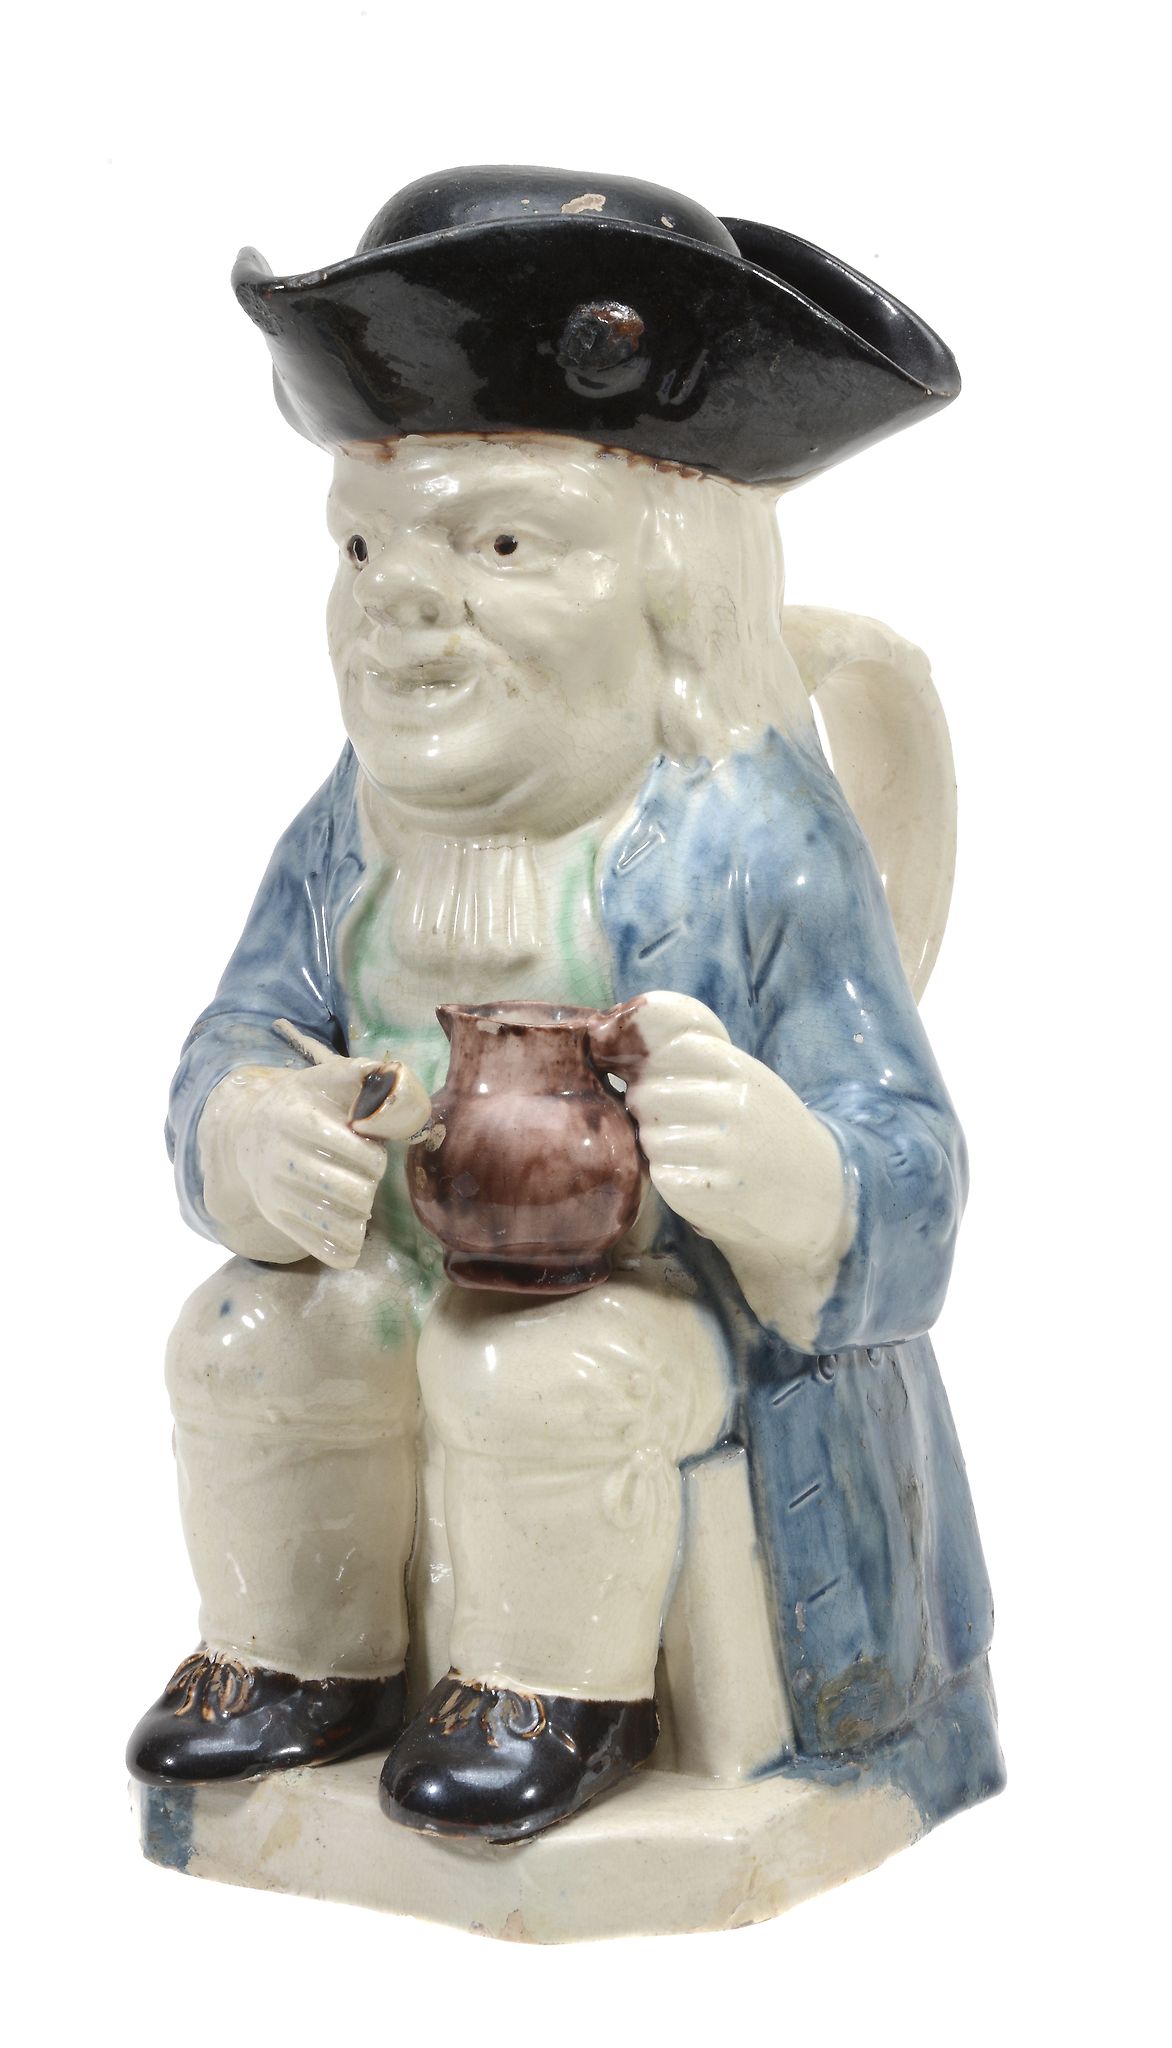 A pearlware Toby jug of so-called 'step' or 'Twyford' type, circa 1780  A pearlware Toby jug of so-